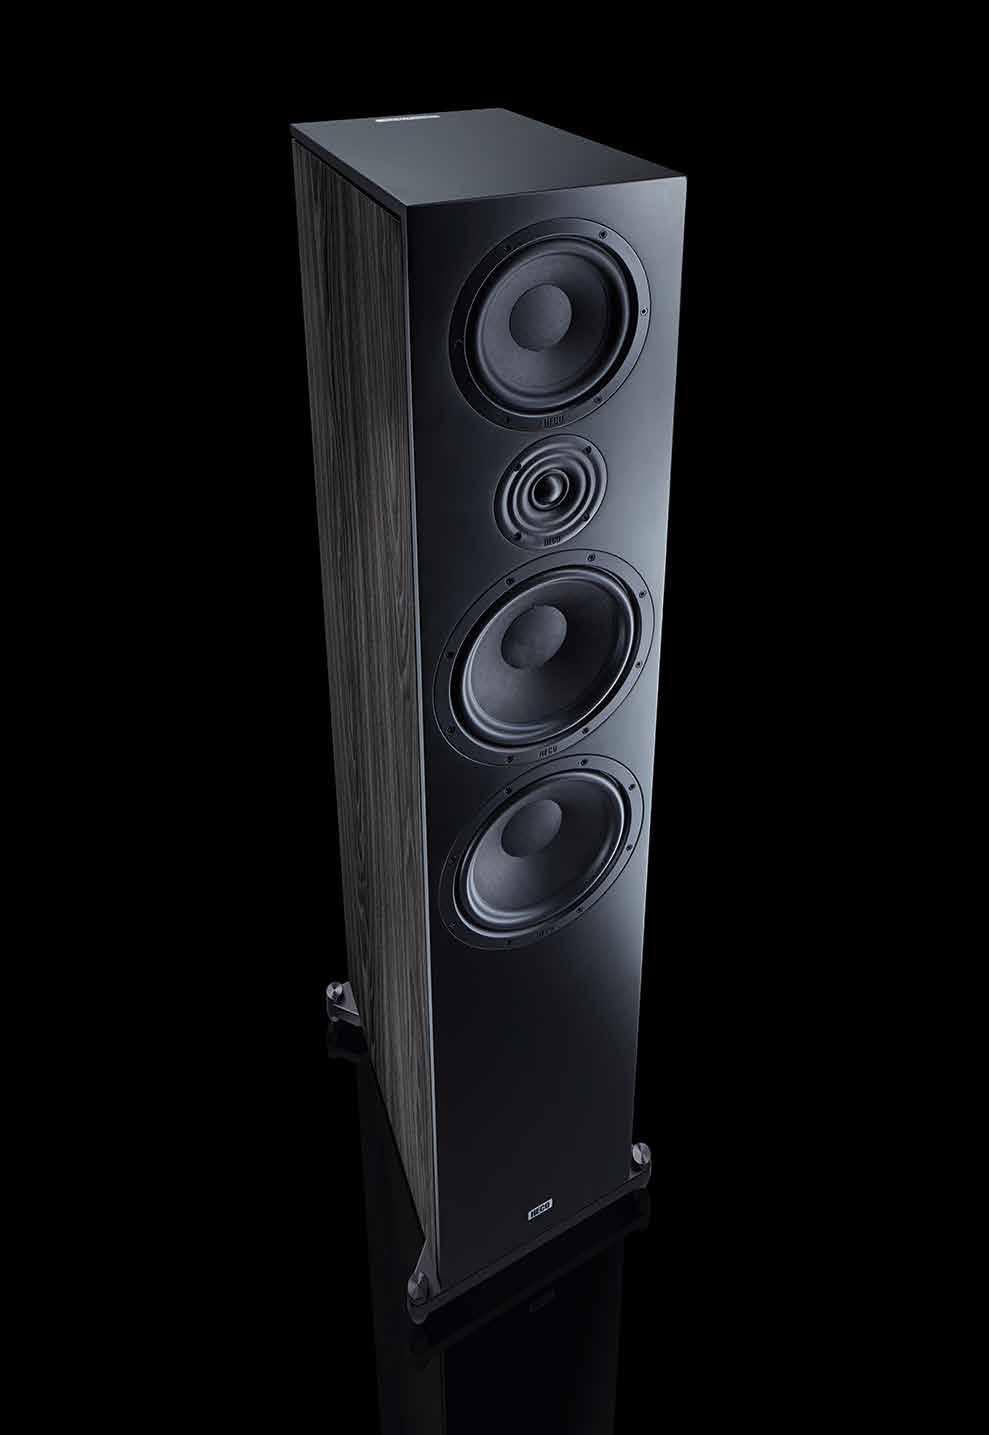 Floorstander with outstanding sound characteristics and innovative